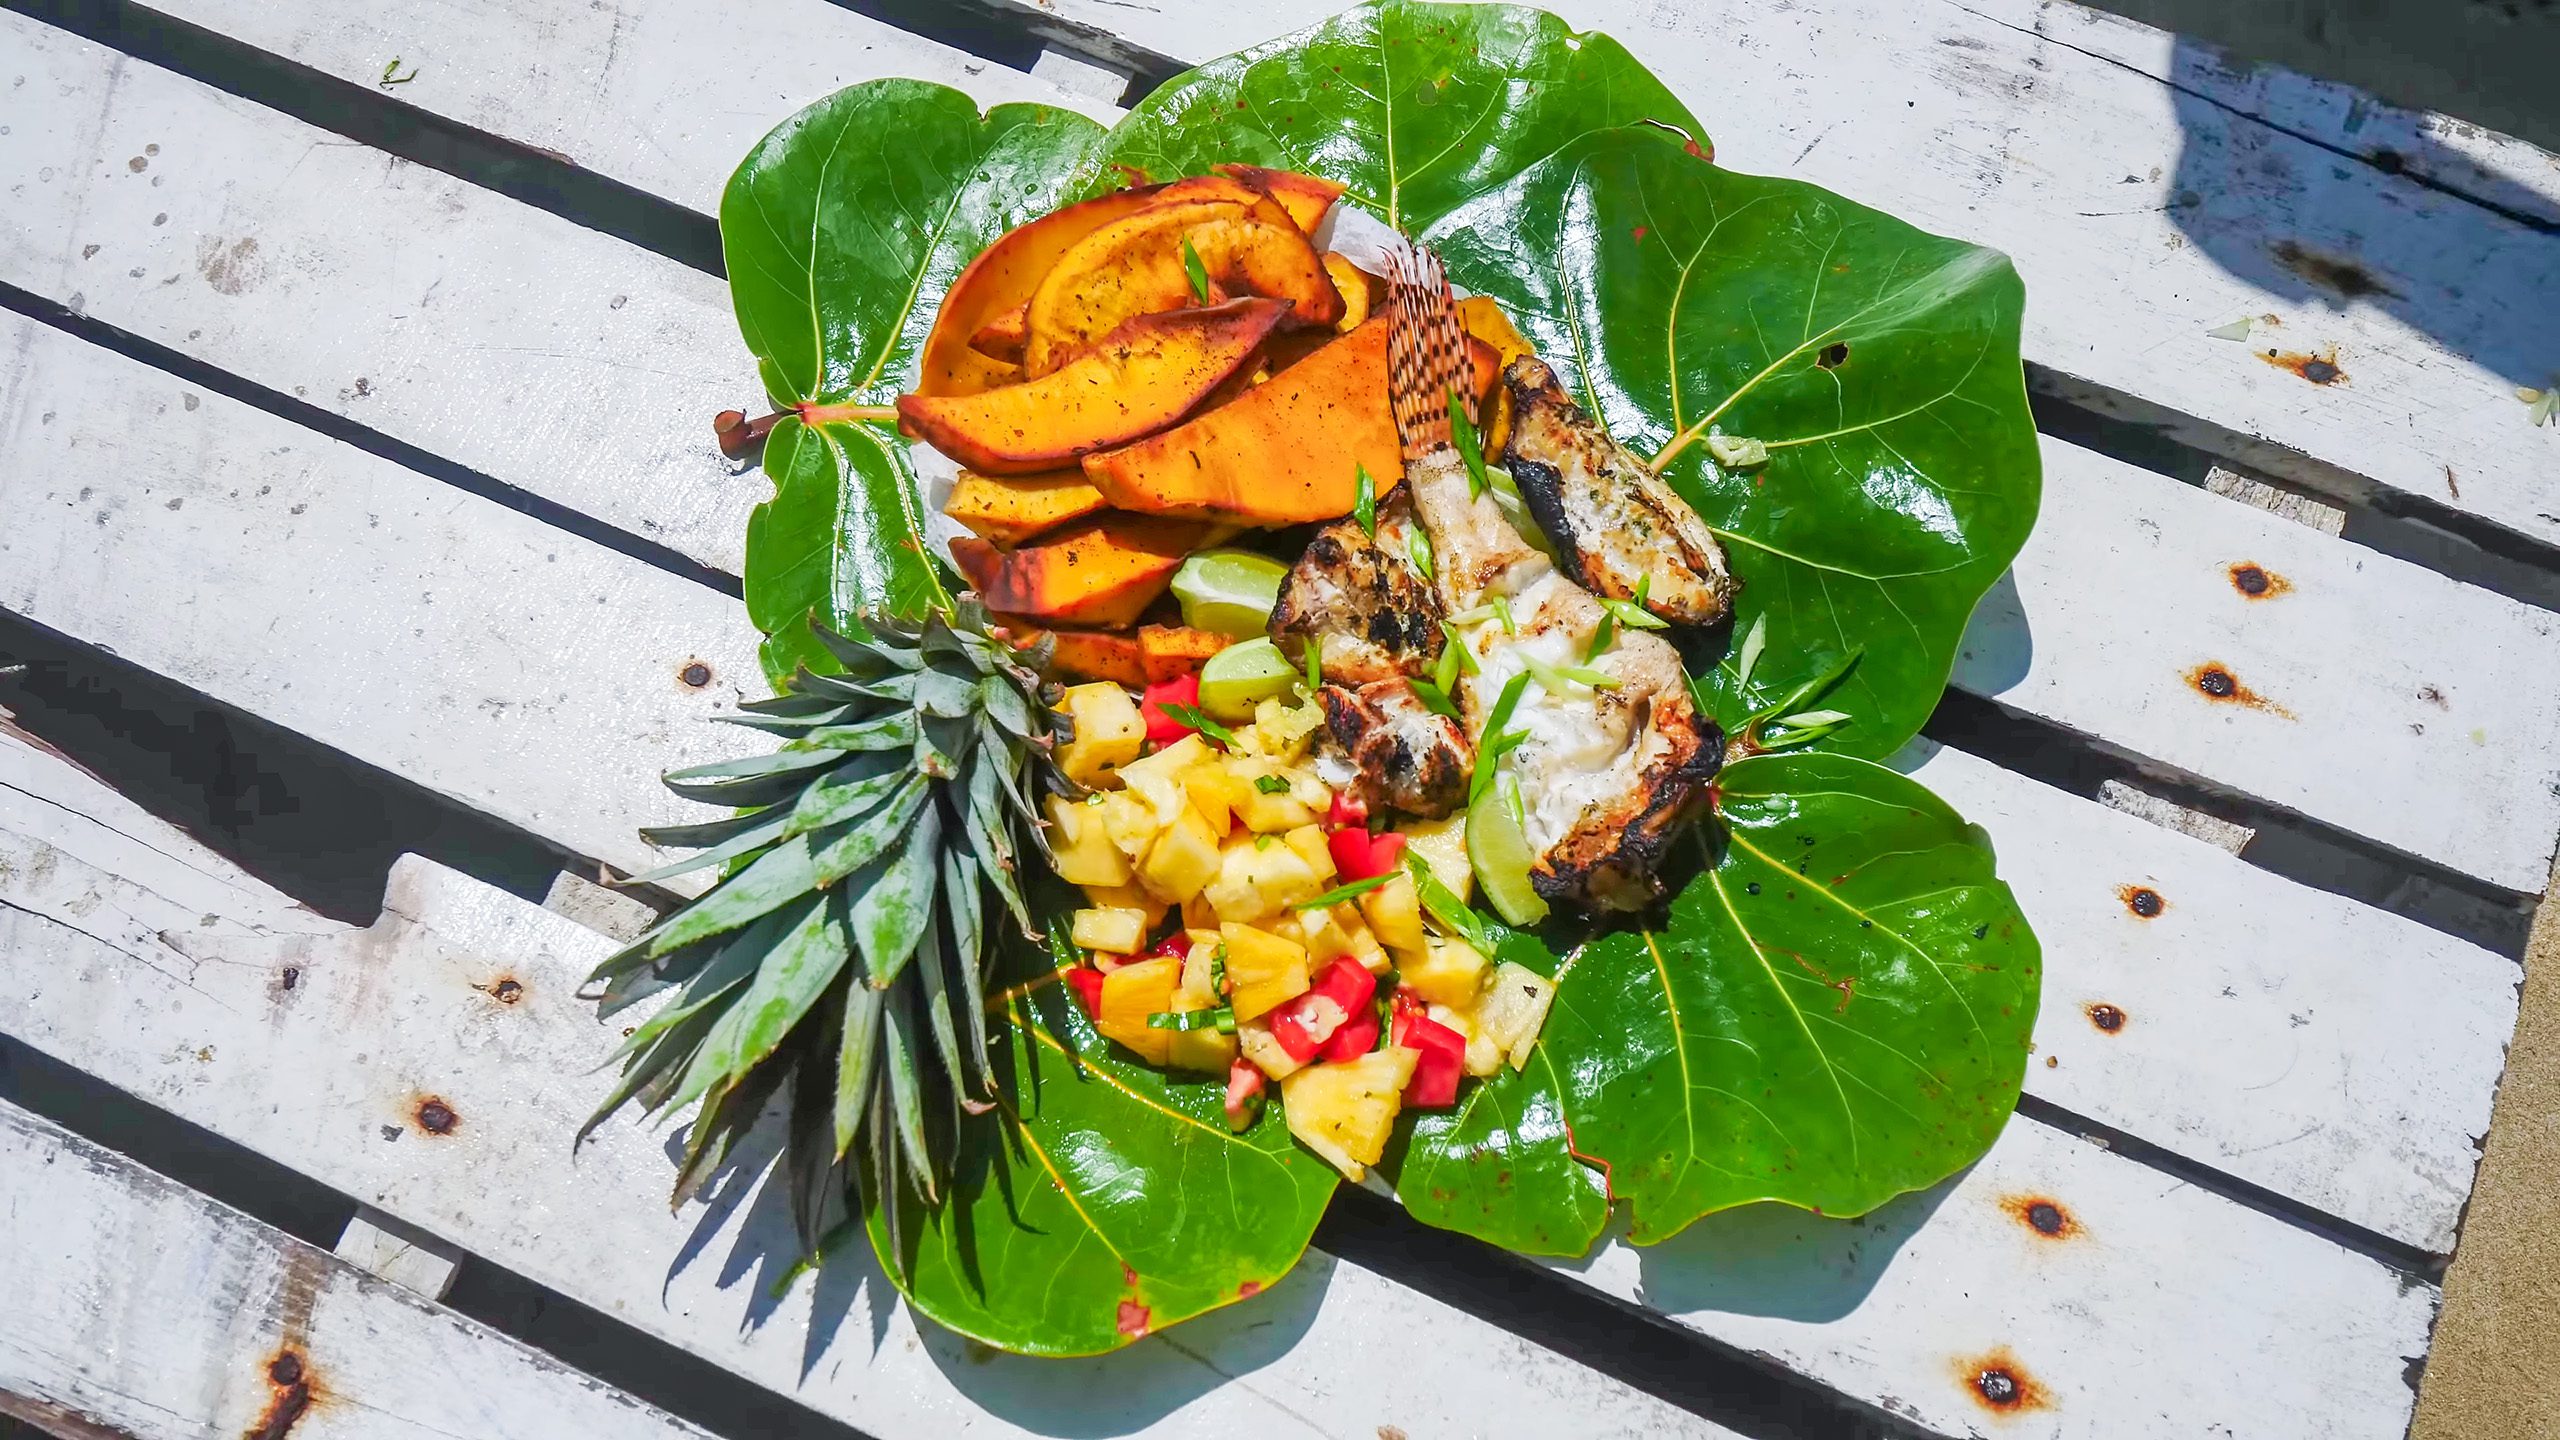 Barbecued lionfish, breadfruit, and pineapple-tomato chow | Davidsbeenhere